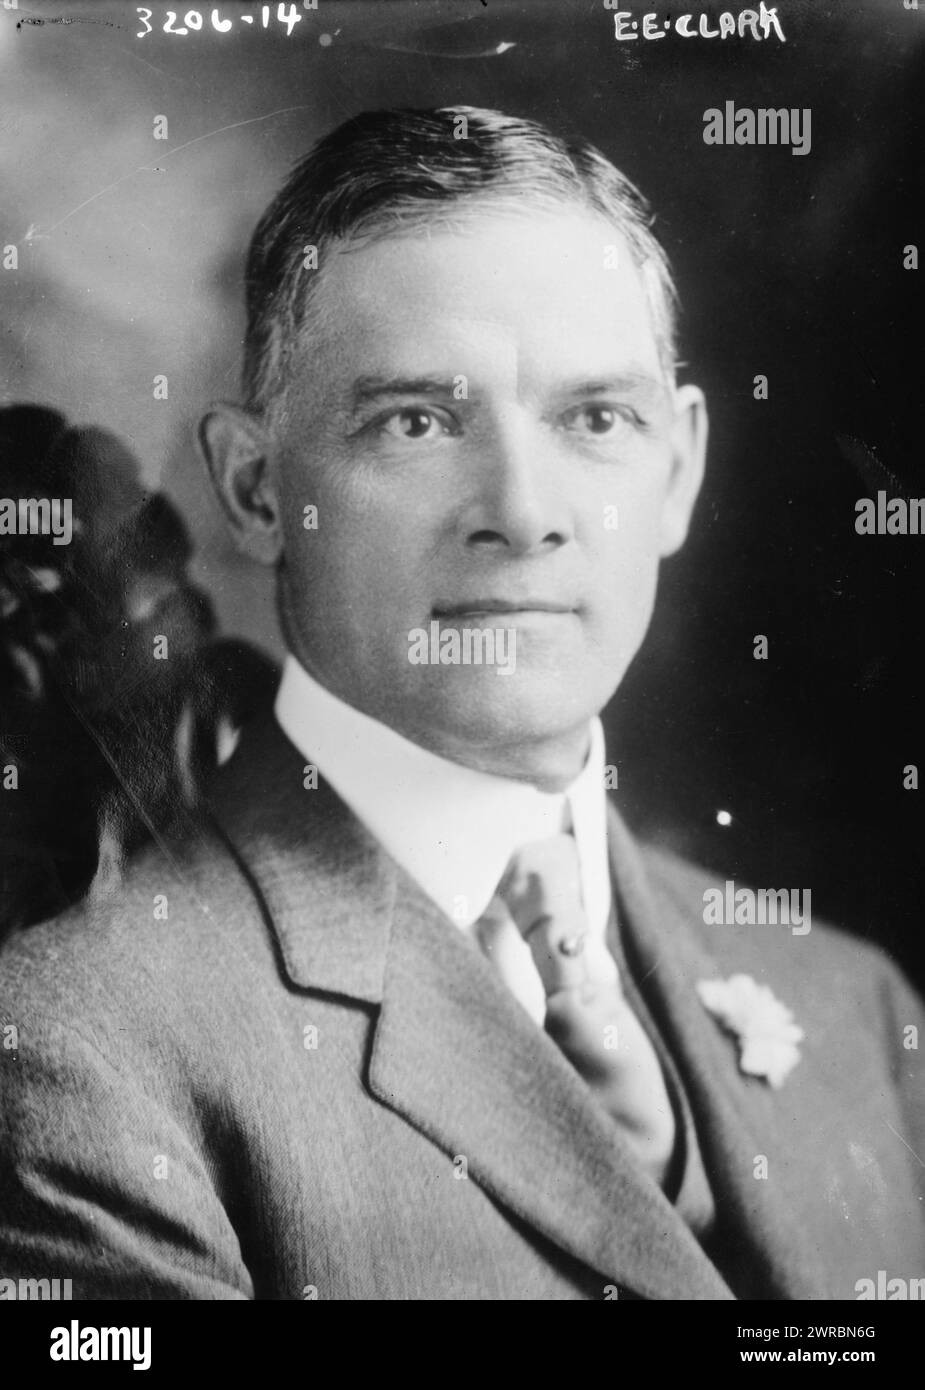 E.E. Clark, Photograph shows Edgar Erastus Clark, an American attorney, government official, and union official, who served on the Interstate Commerce Commission from 1906 to 1921., between ca. 1910 and ca. 1915, Glass negatives, 1 negative: glass Stock Photo